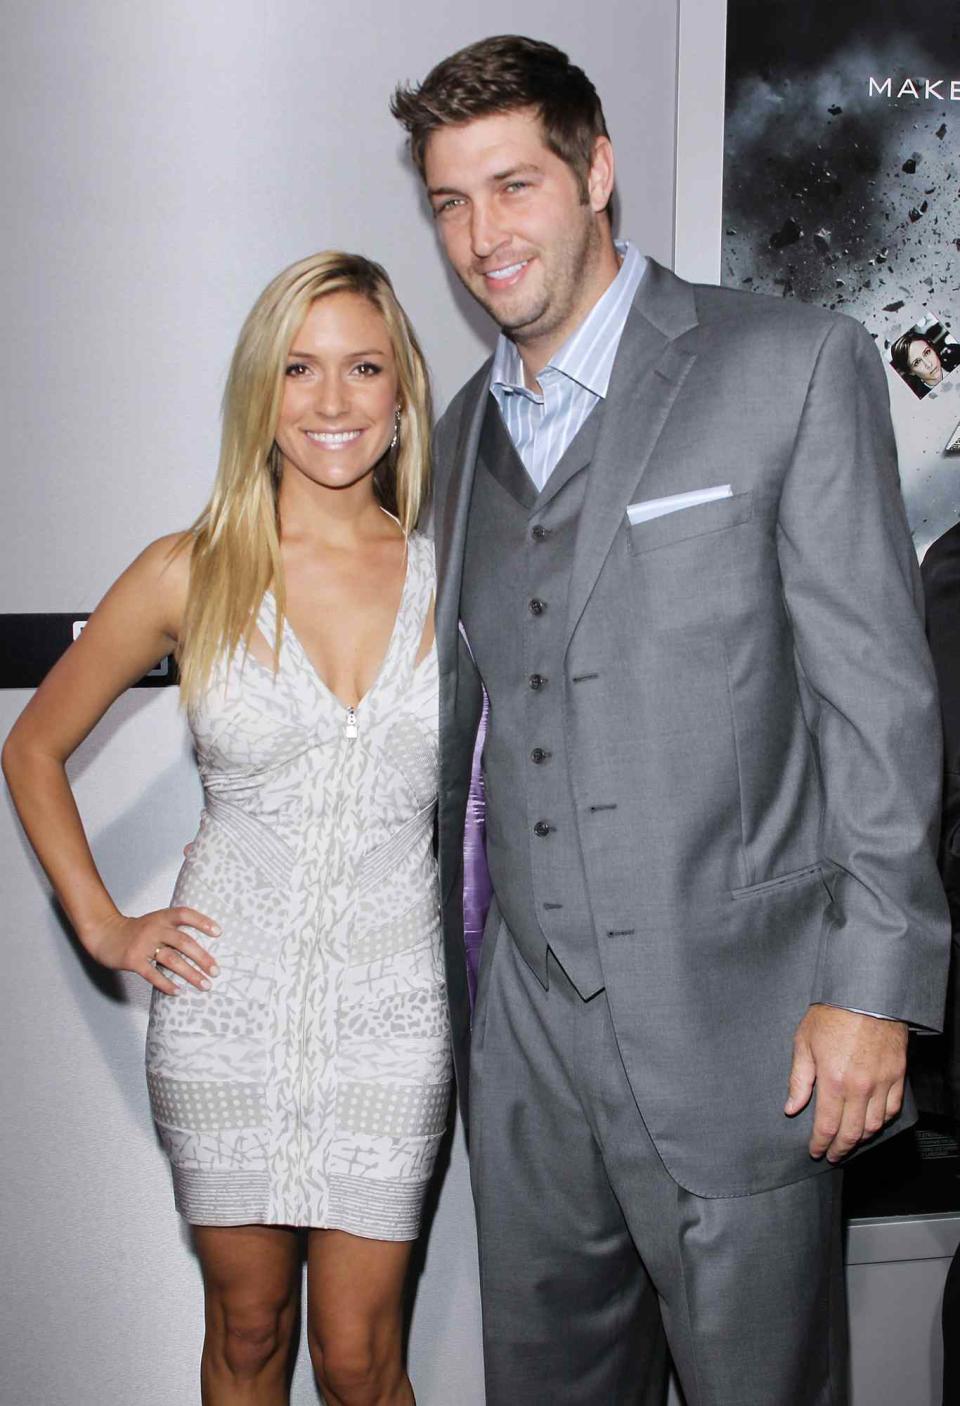 Kristin Cavallari (L) and Jay Cutler arrive at the Los Angeles premiere of "Source Code" held at ArcLight Cinemas Cinerama Dome on March 28, 2011 in Hollywood, California